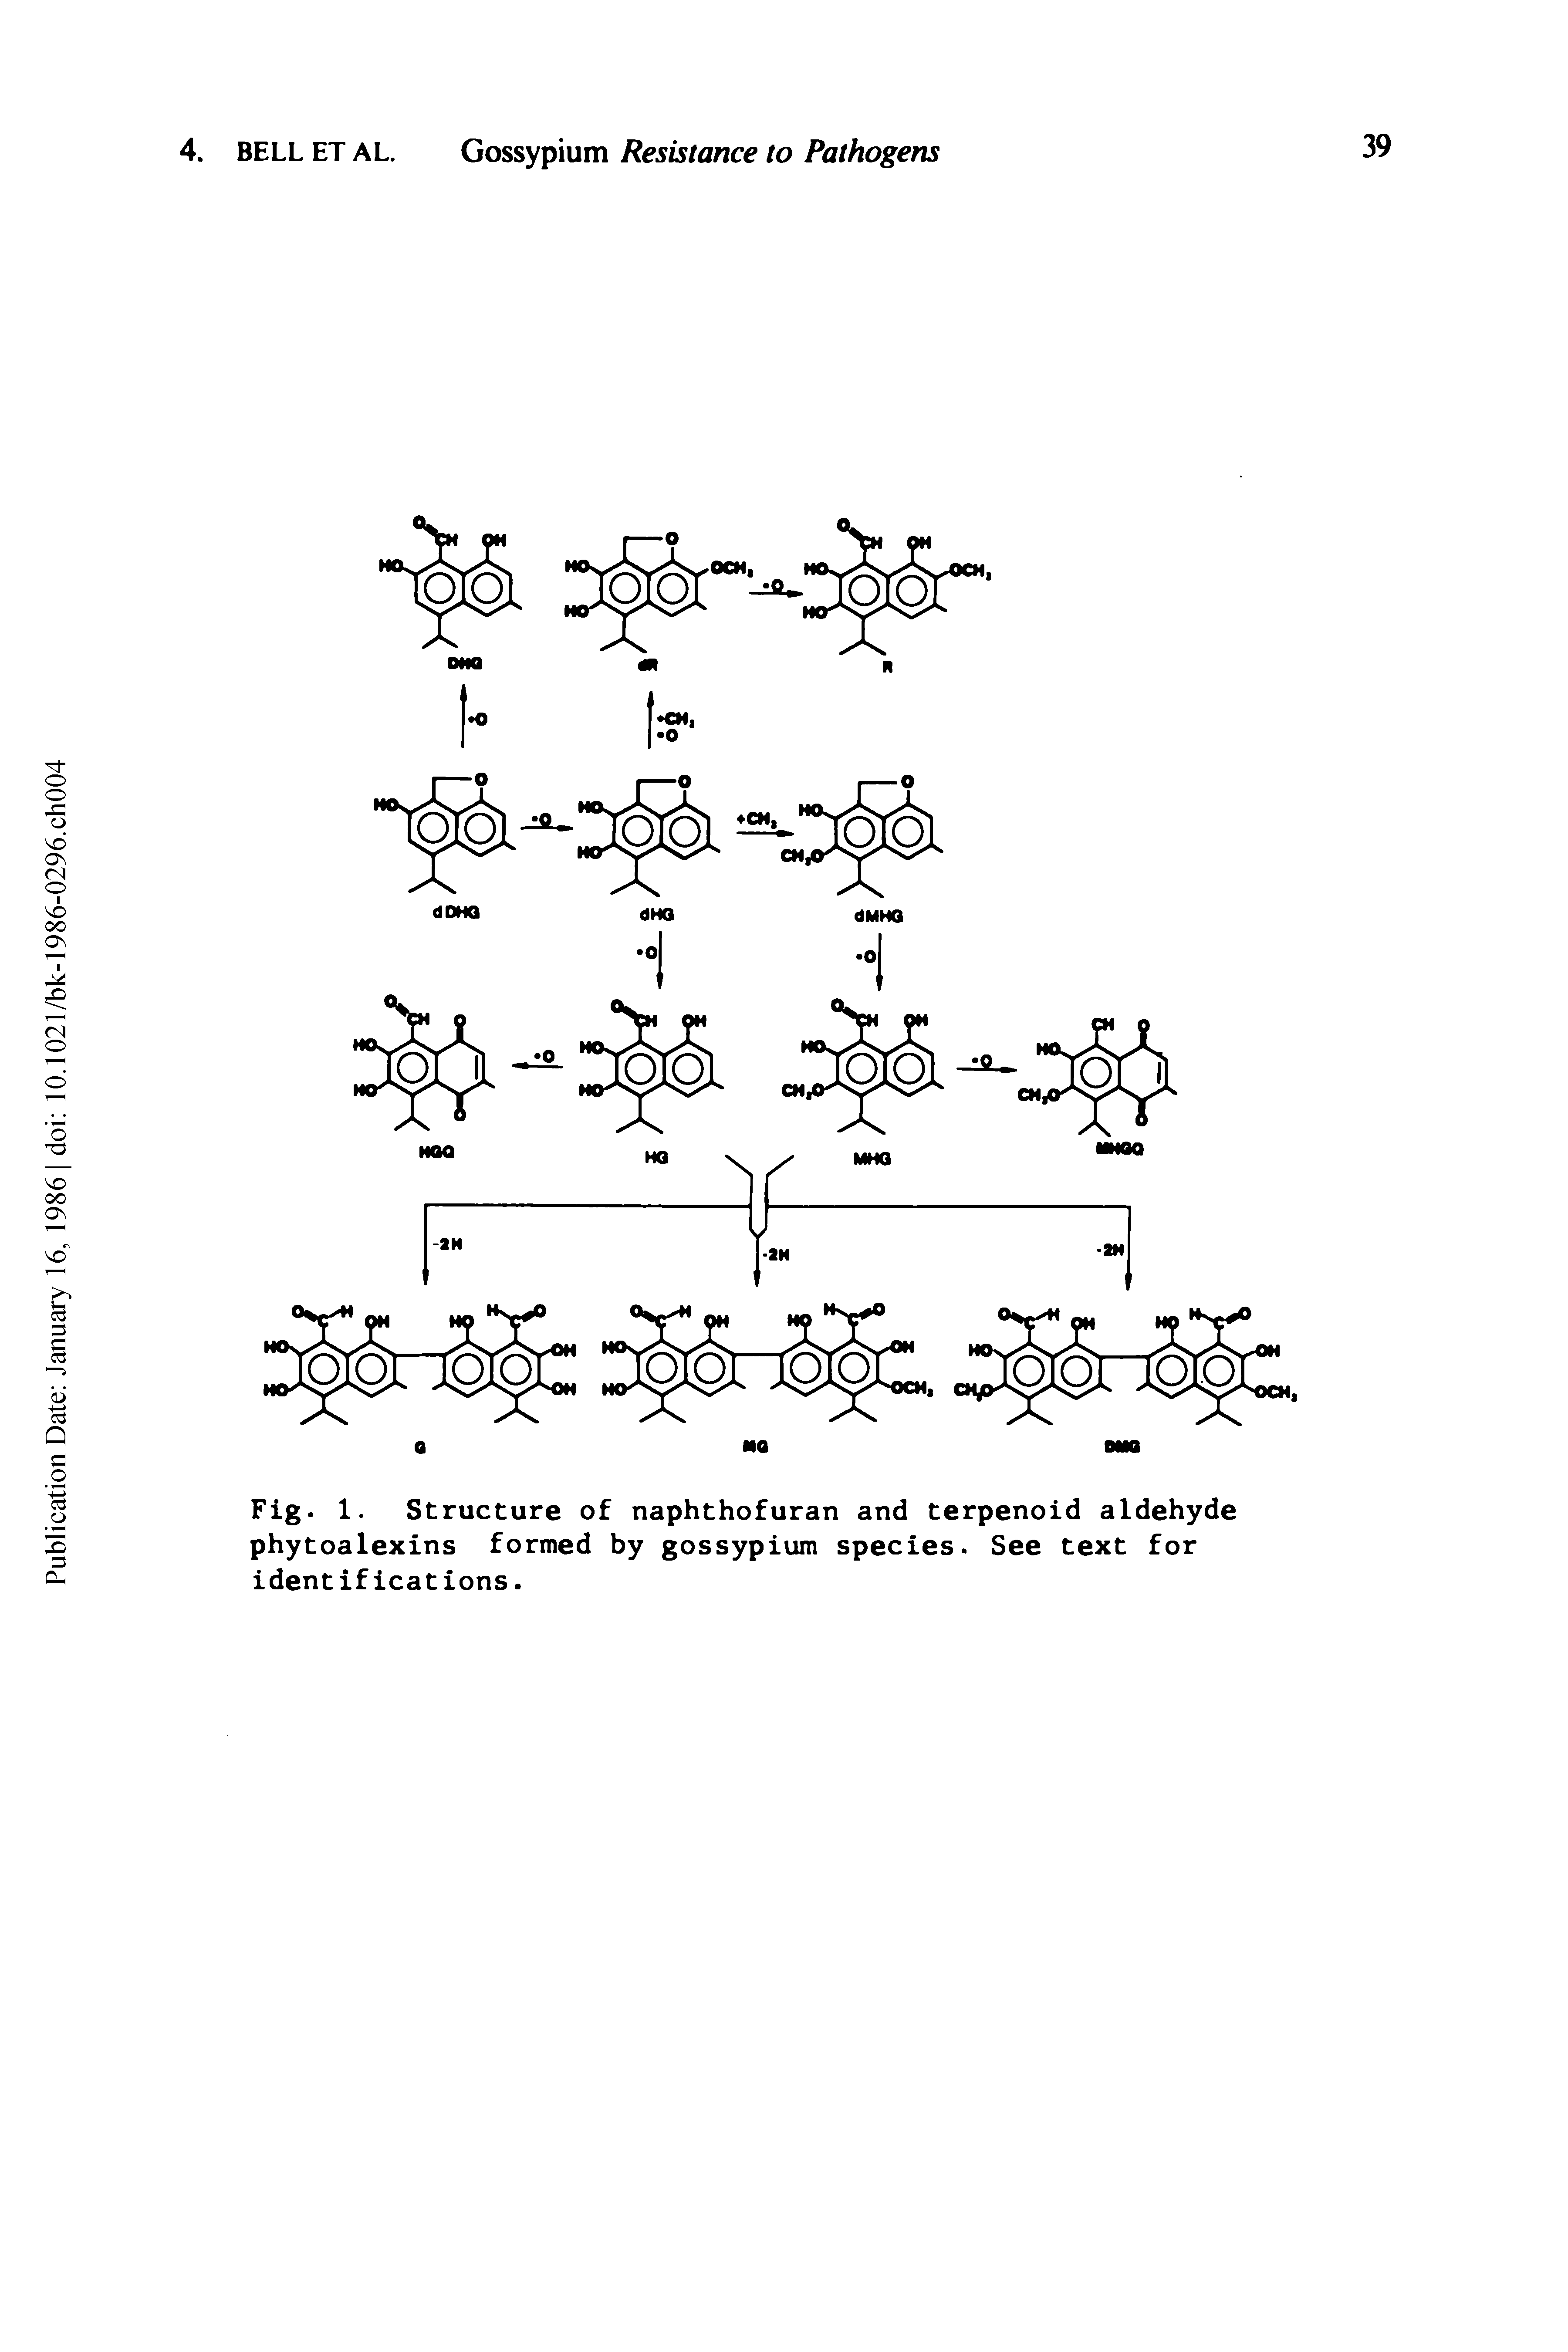 Fig. 1. Structure of naphthofuran and terpenoid aldehyde phytoalexins formed by gossypium species. See text for identifications.